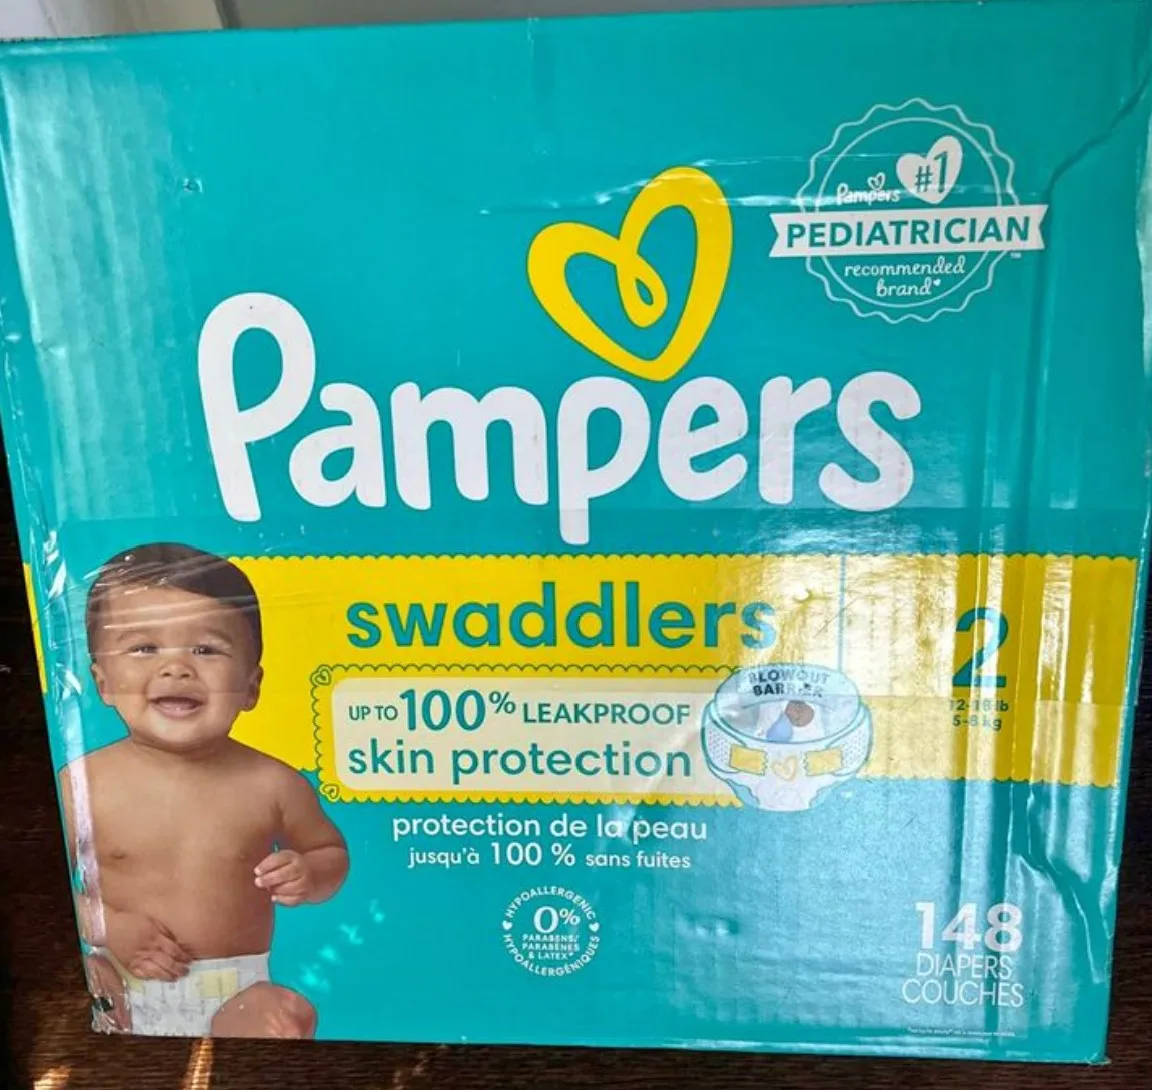 Biggest Supplier Of Diapers Size 2/newborn 148 Counts - Pampers ...